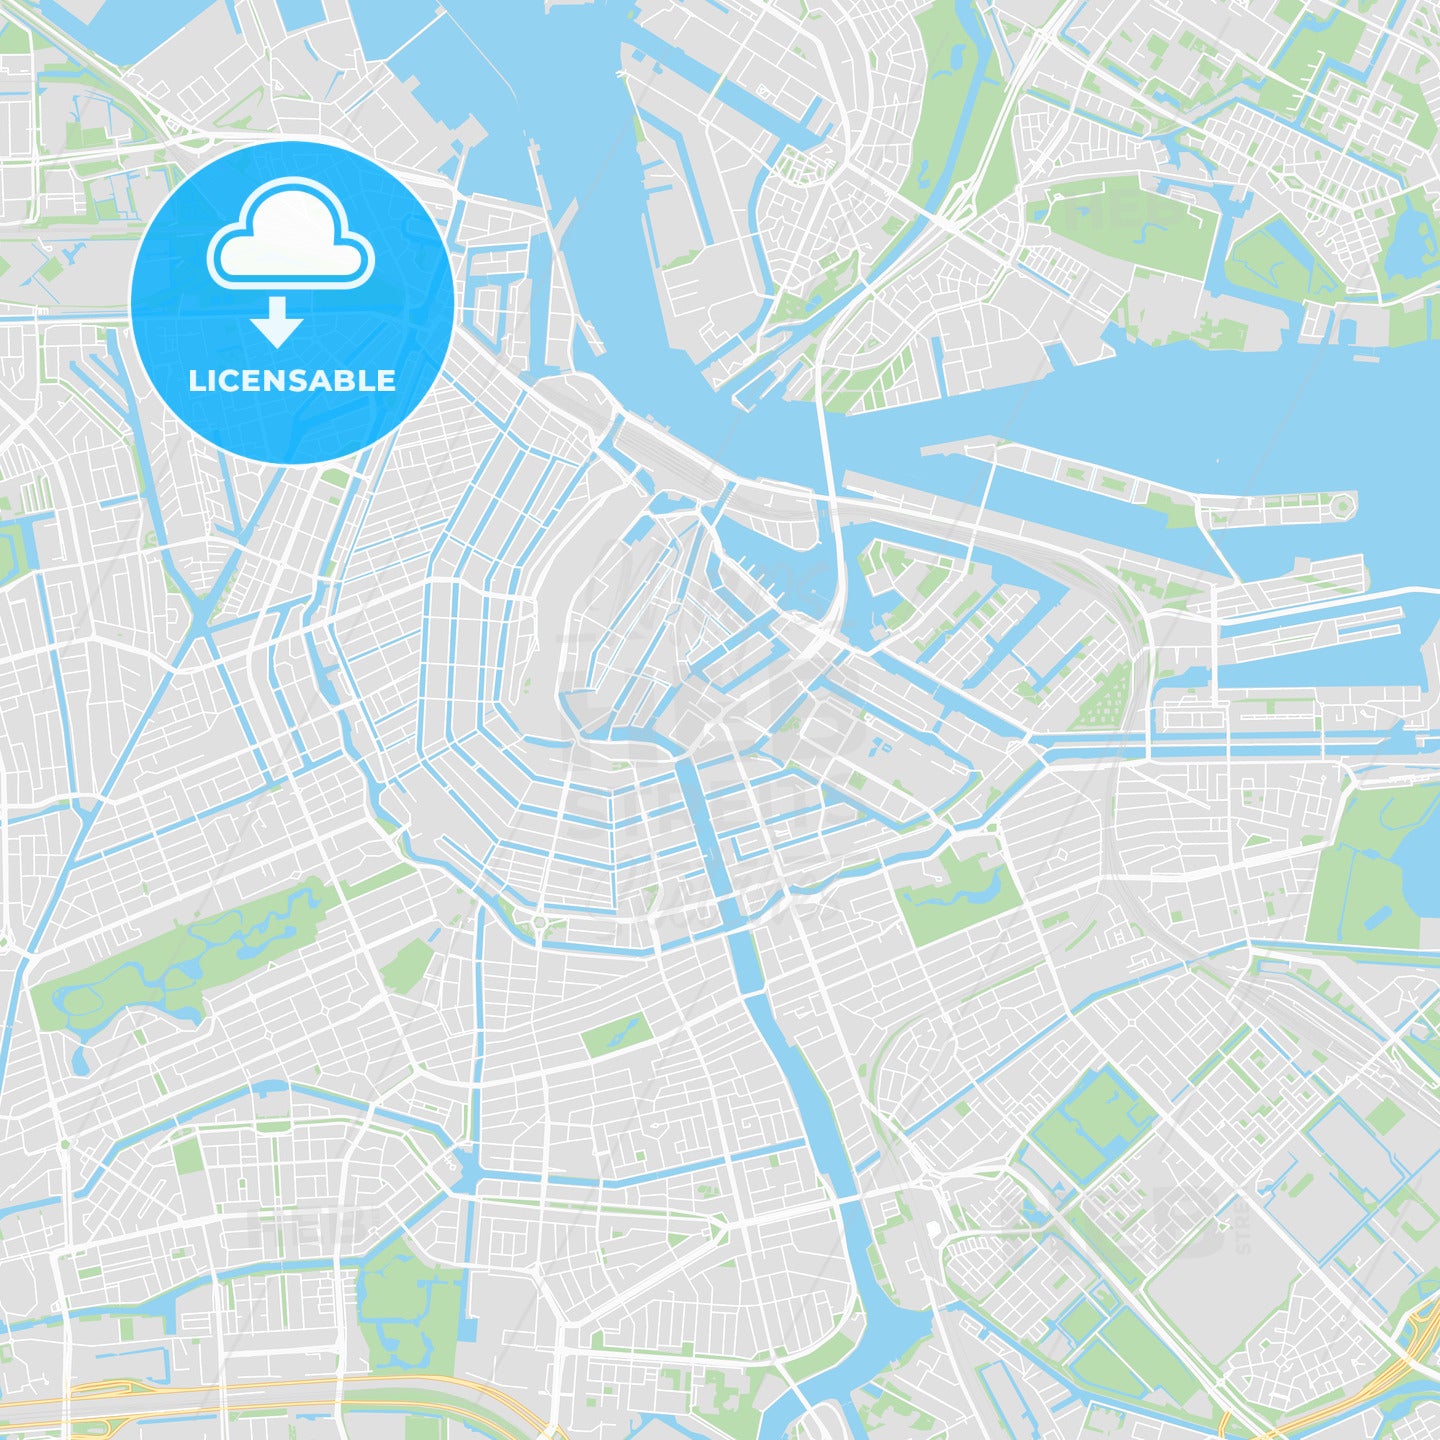 Printable map of Amsterdam, Netherlands